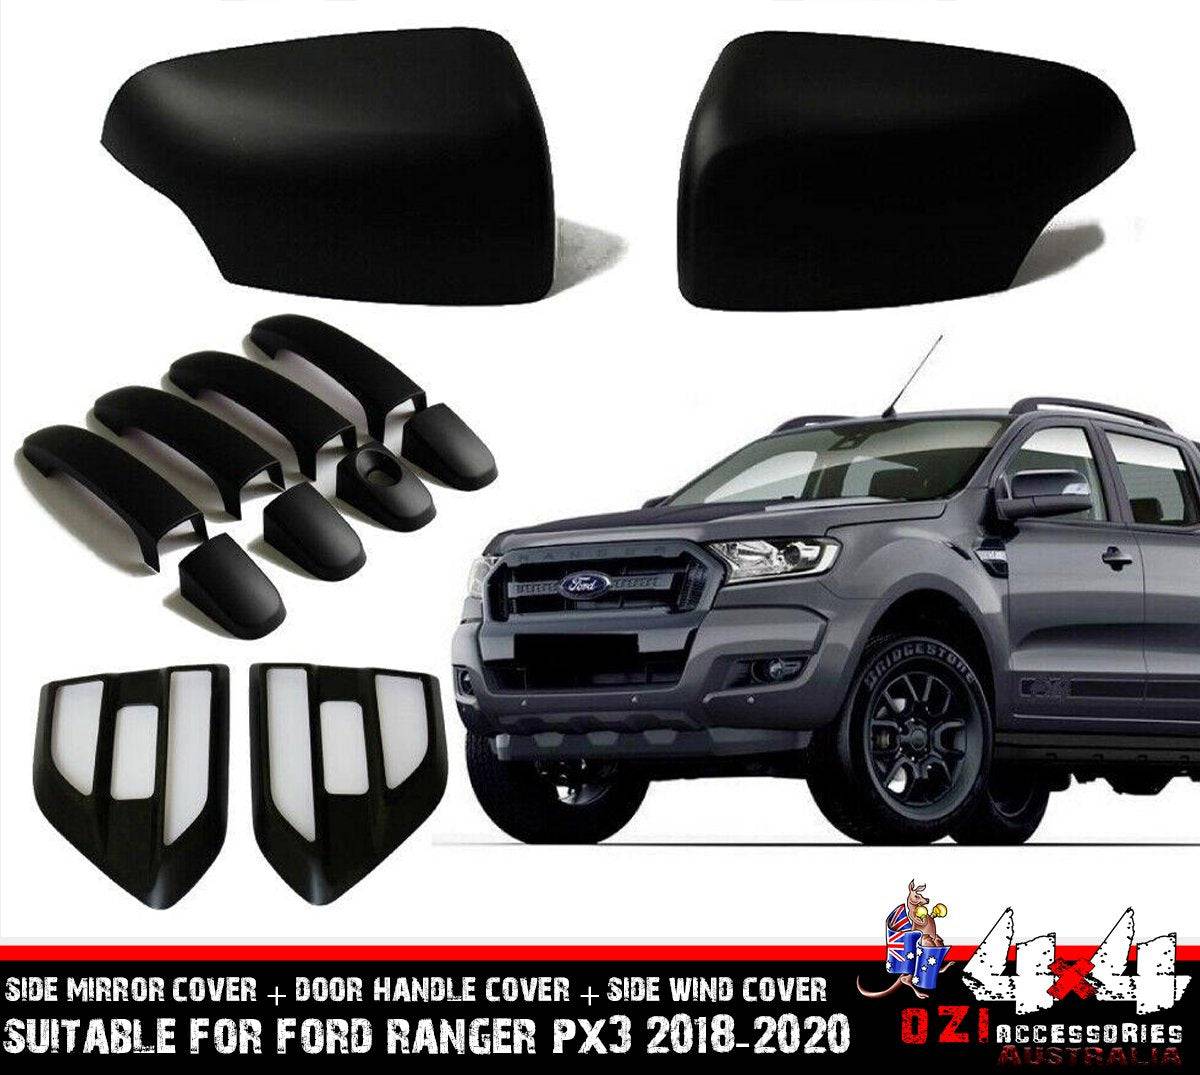 Black Out Kit Suits Ford Ranger Px3 (Online Only)